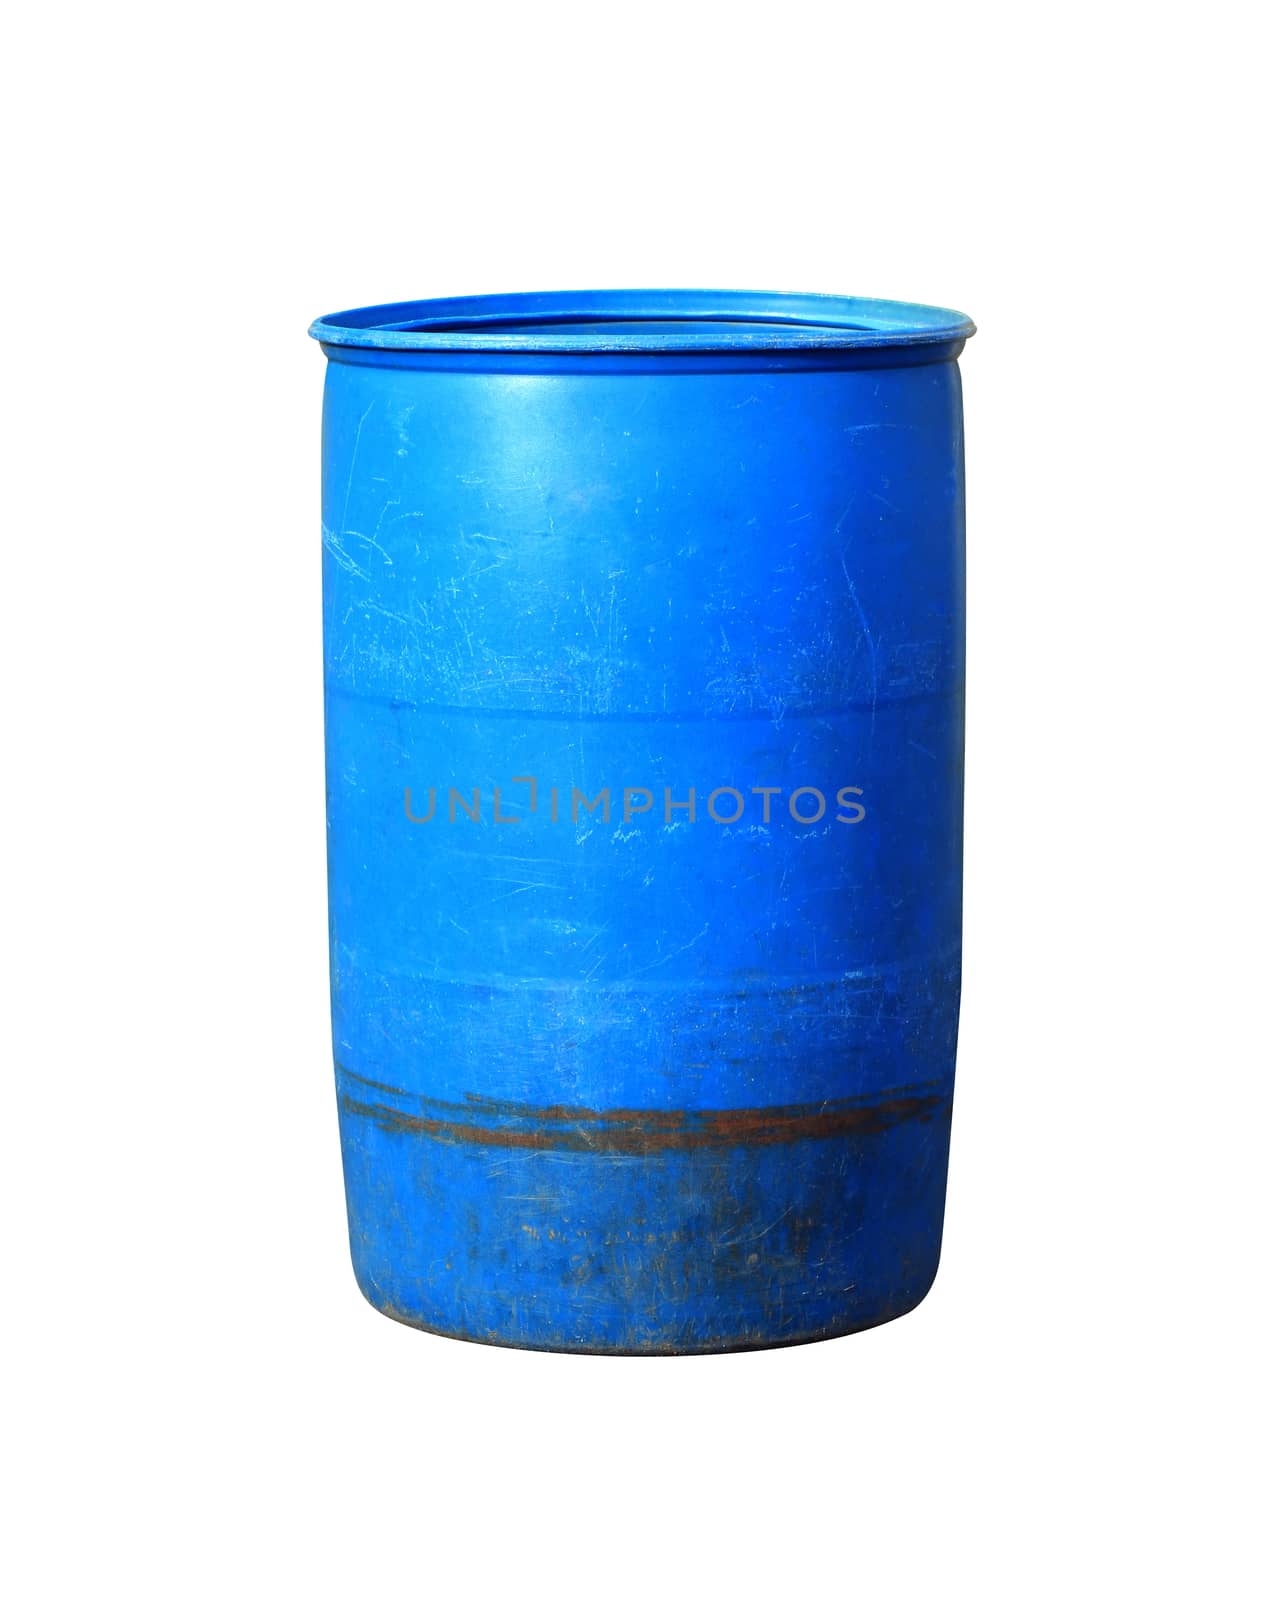 Old Blue plastic bucket waste, Plastic bucket for water, Plastic for Waste Bin (isolated on white background) by cgdeaw